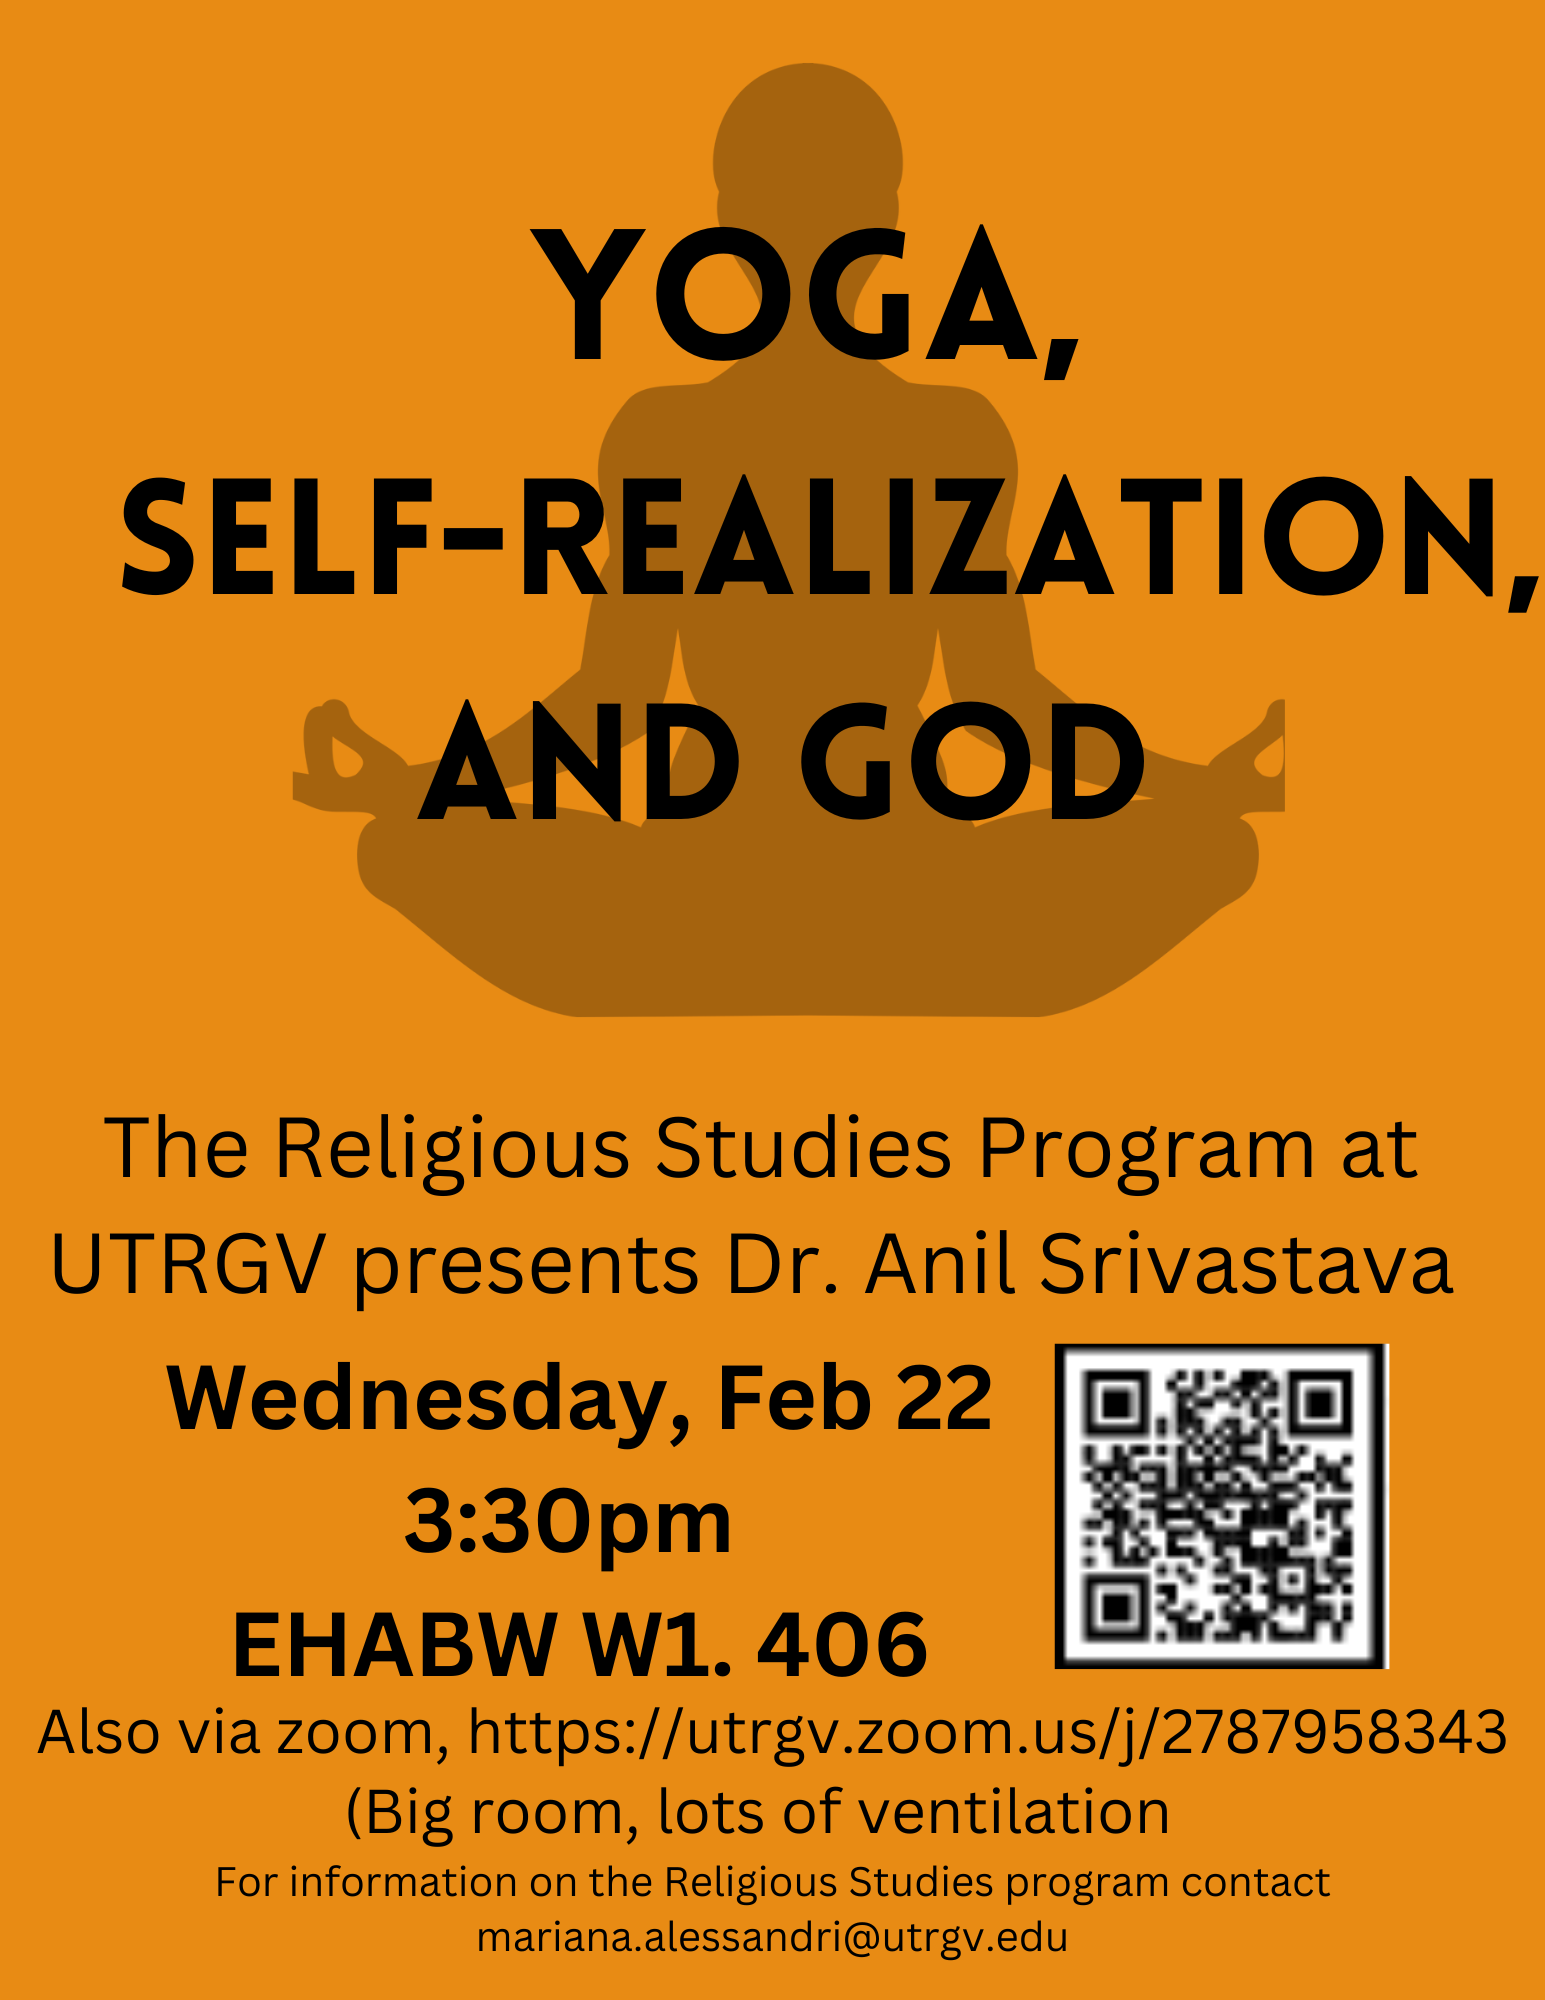 Dr. Anil Srivastava will give a free hybrid talk titled "Yoga, Self-Realization, and God"